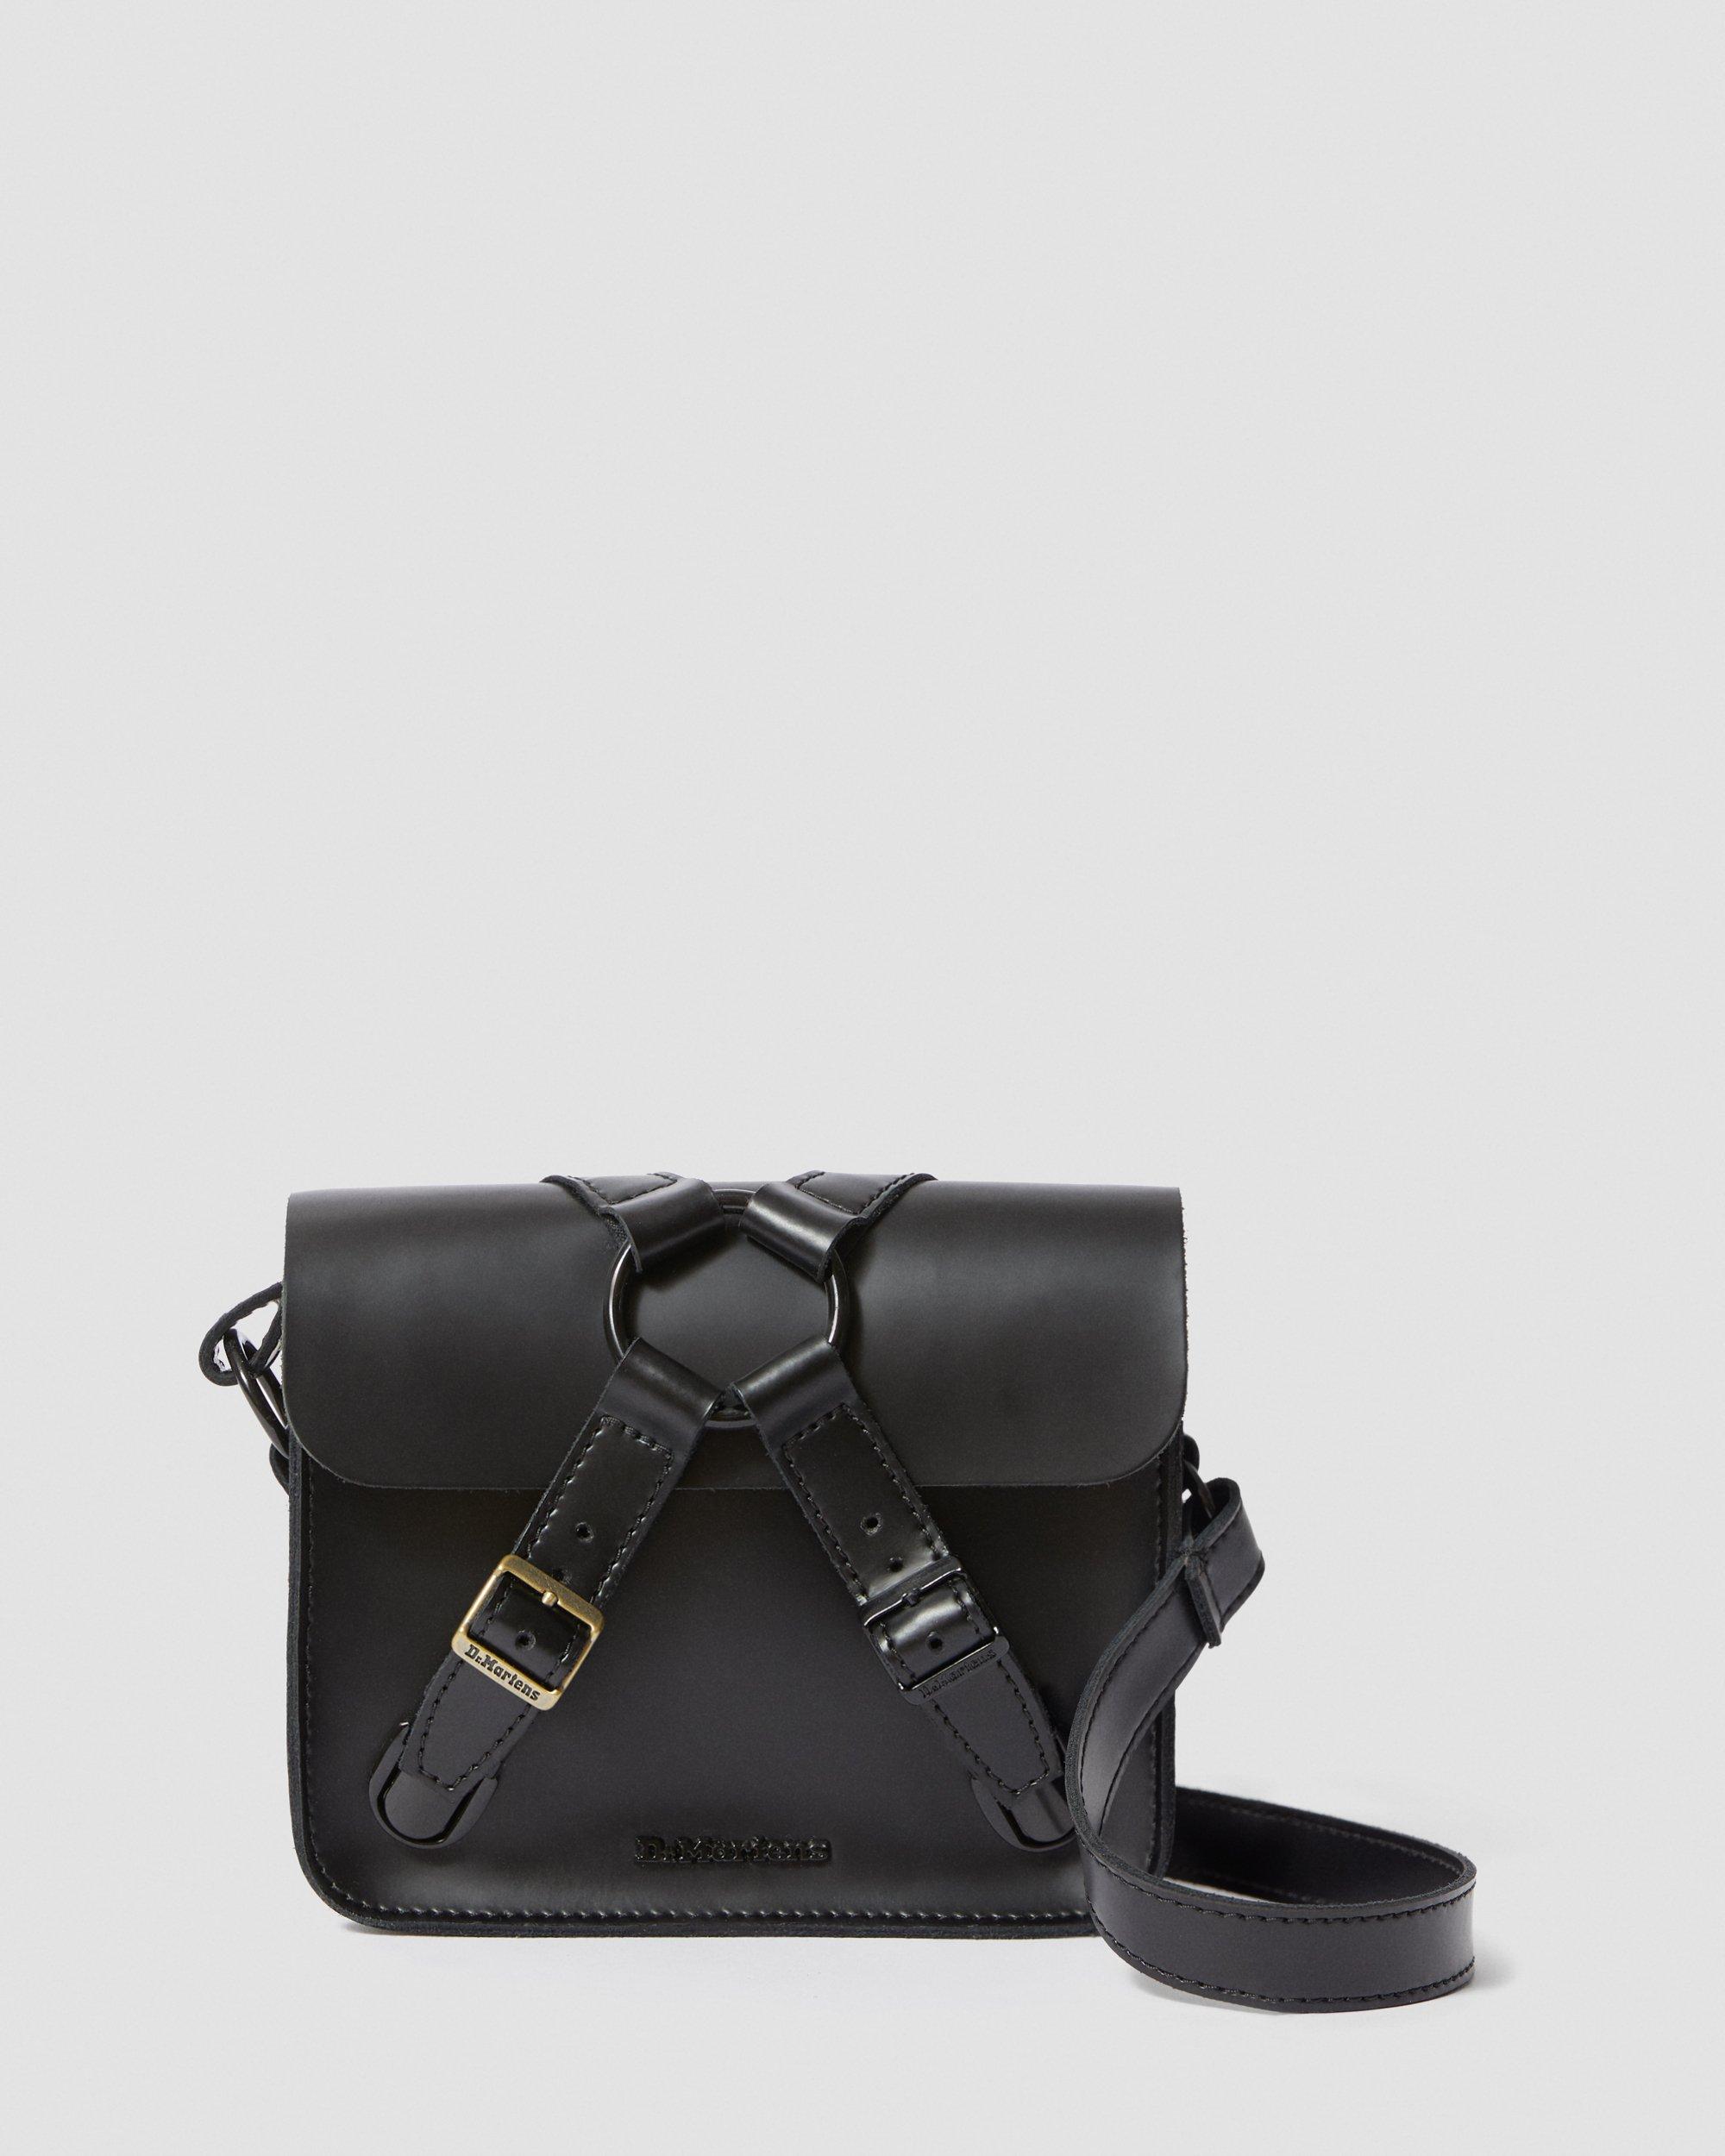 7 Inch Leather Buckle Satchel | Dr. Martens